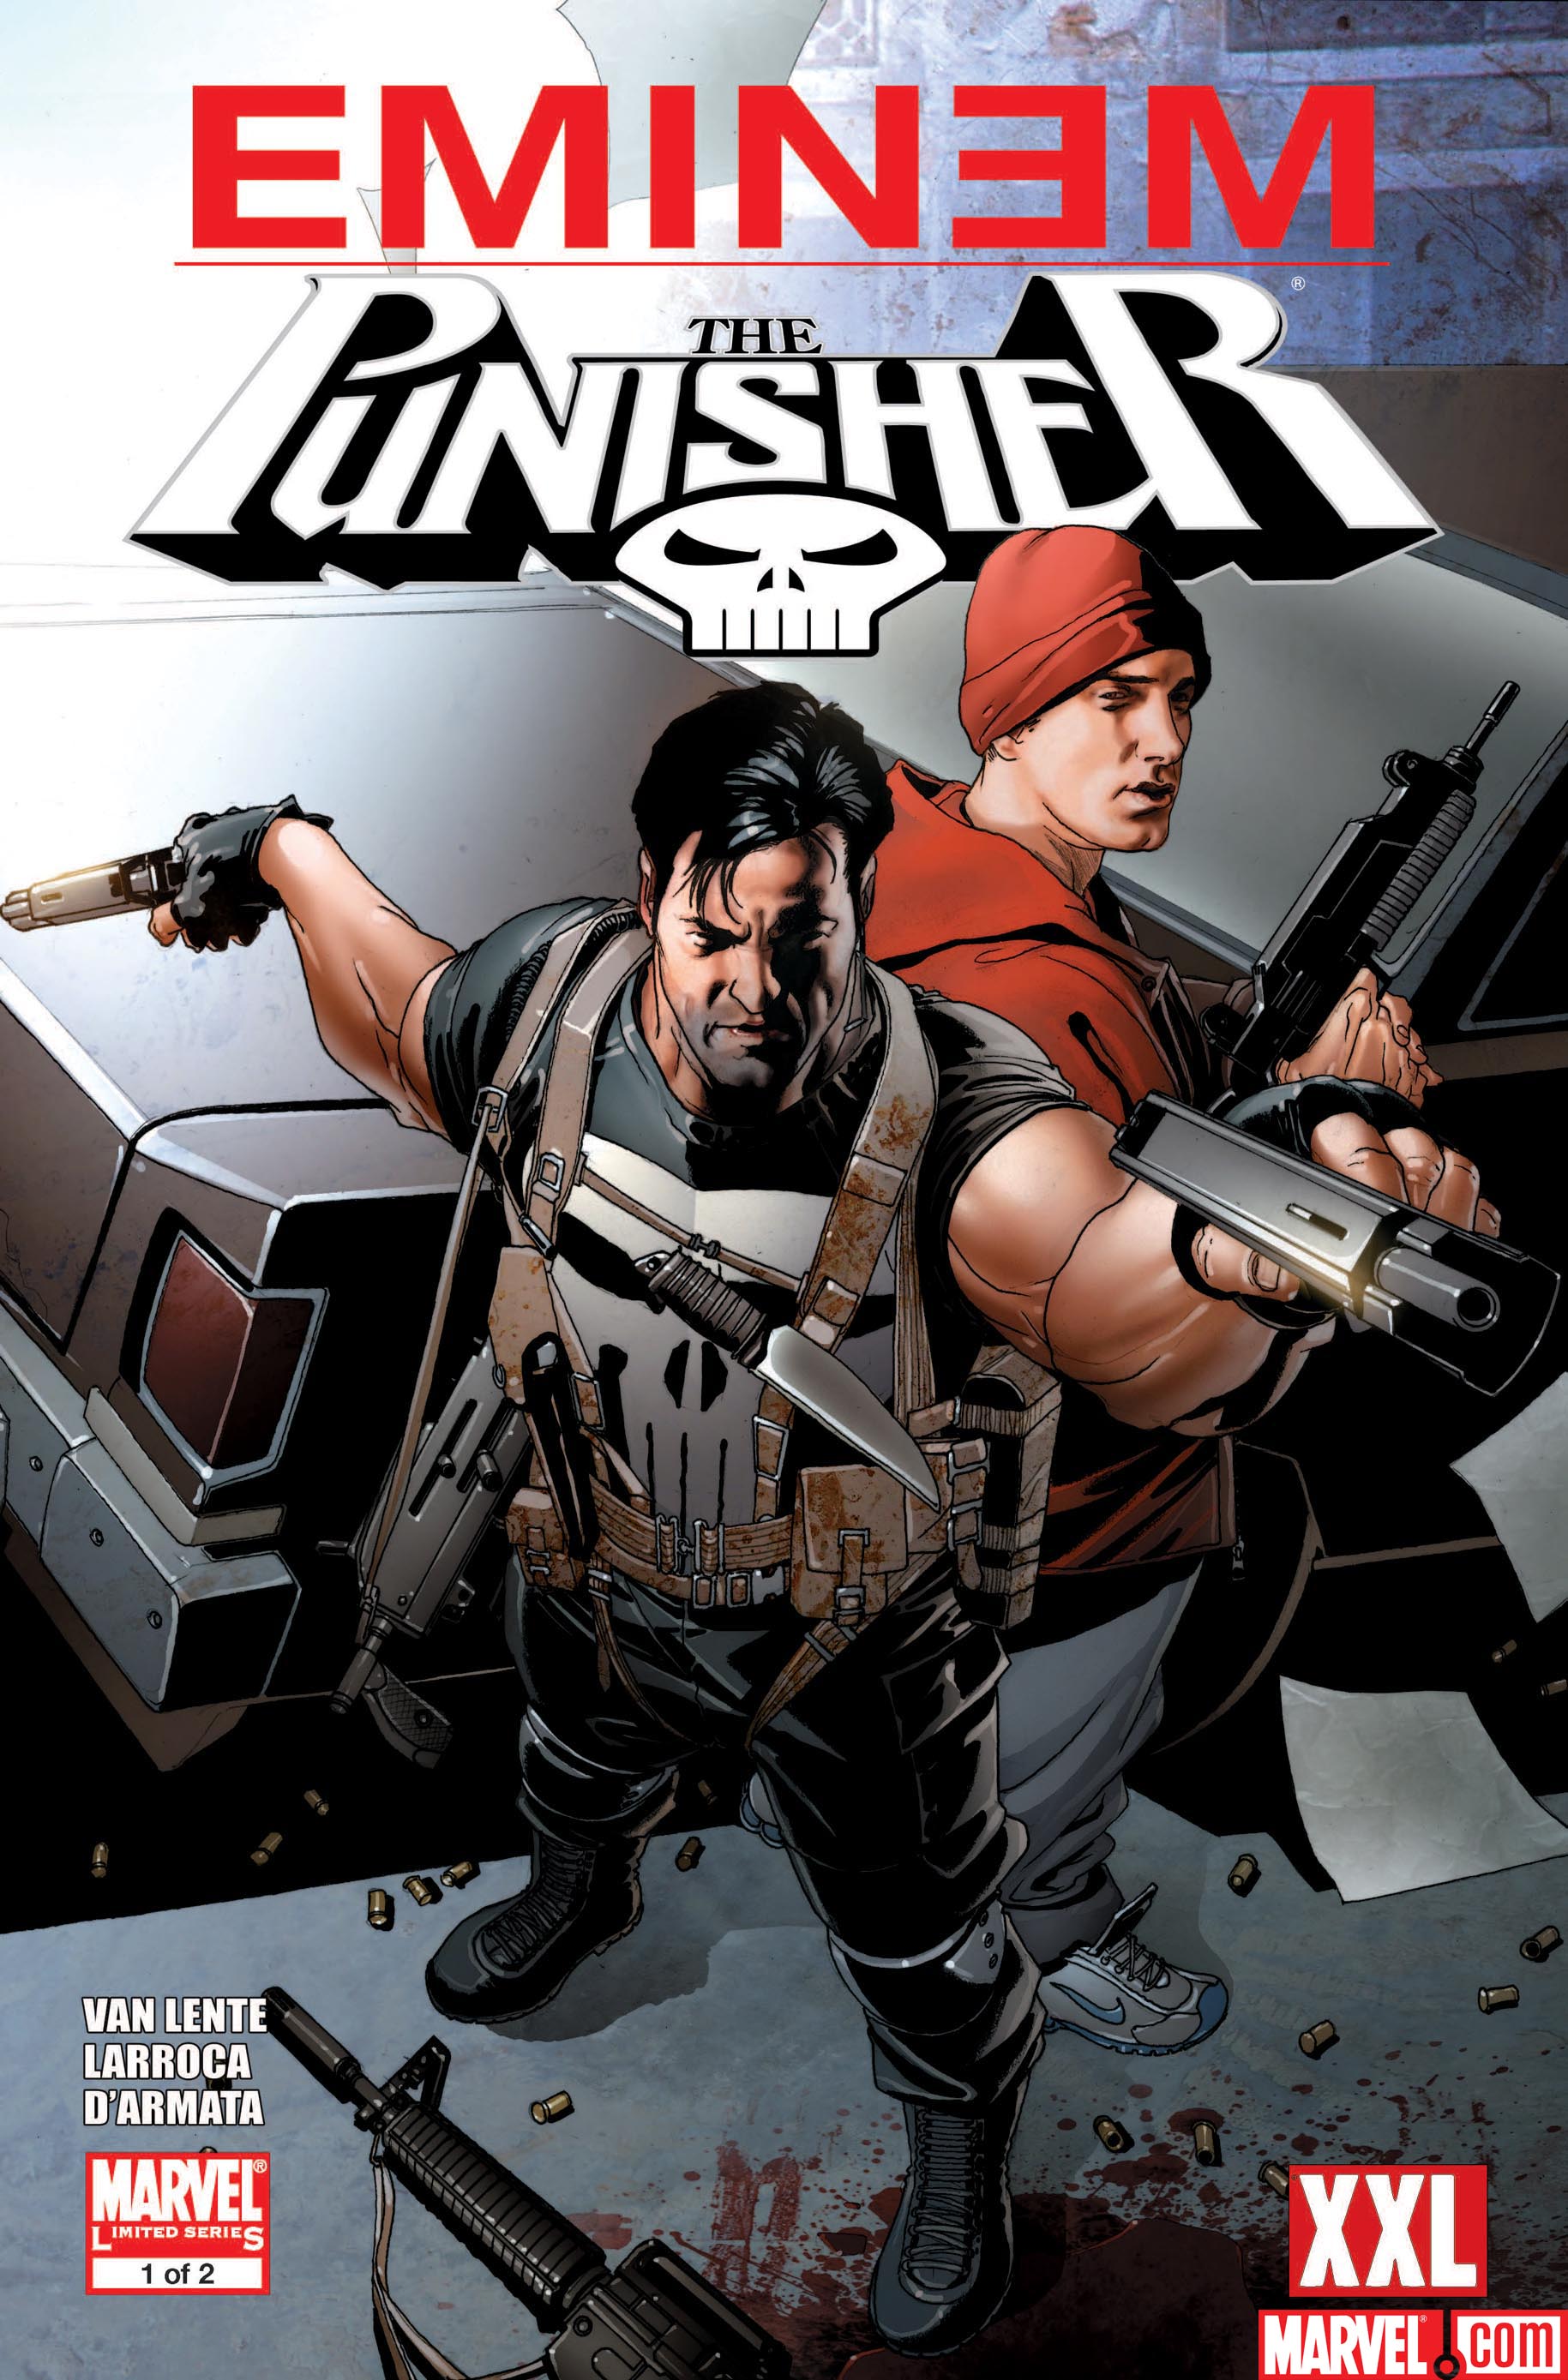 Is Marvel About To Kill The Punisher?